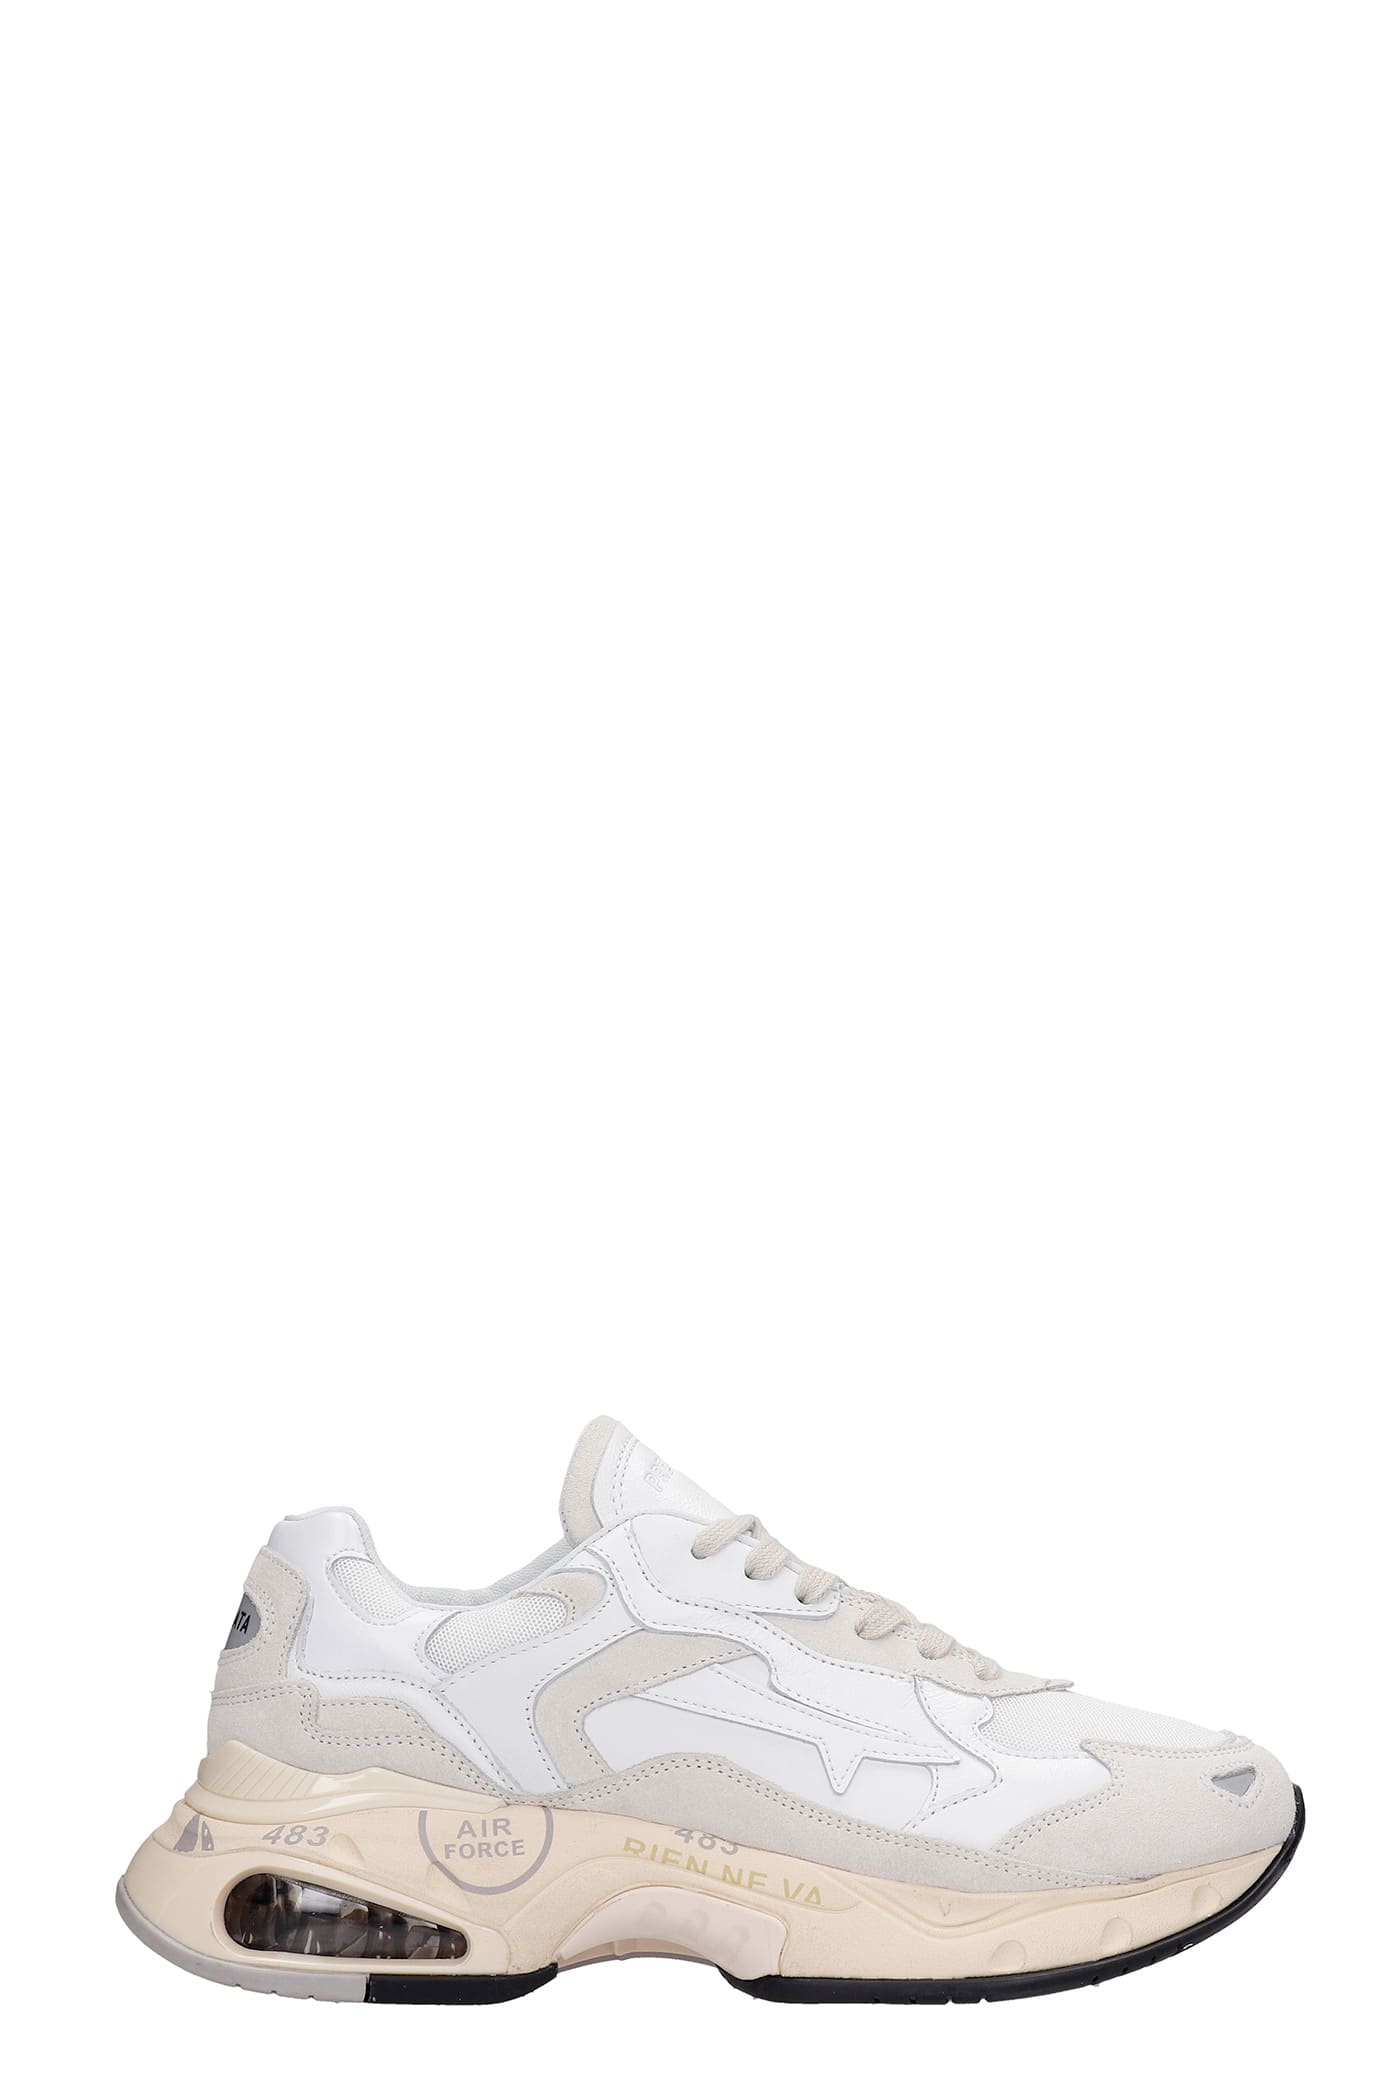 Premiata Sharky Sneakers In White Suede And Leather